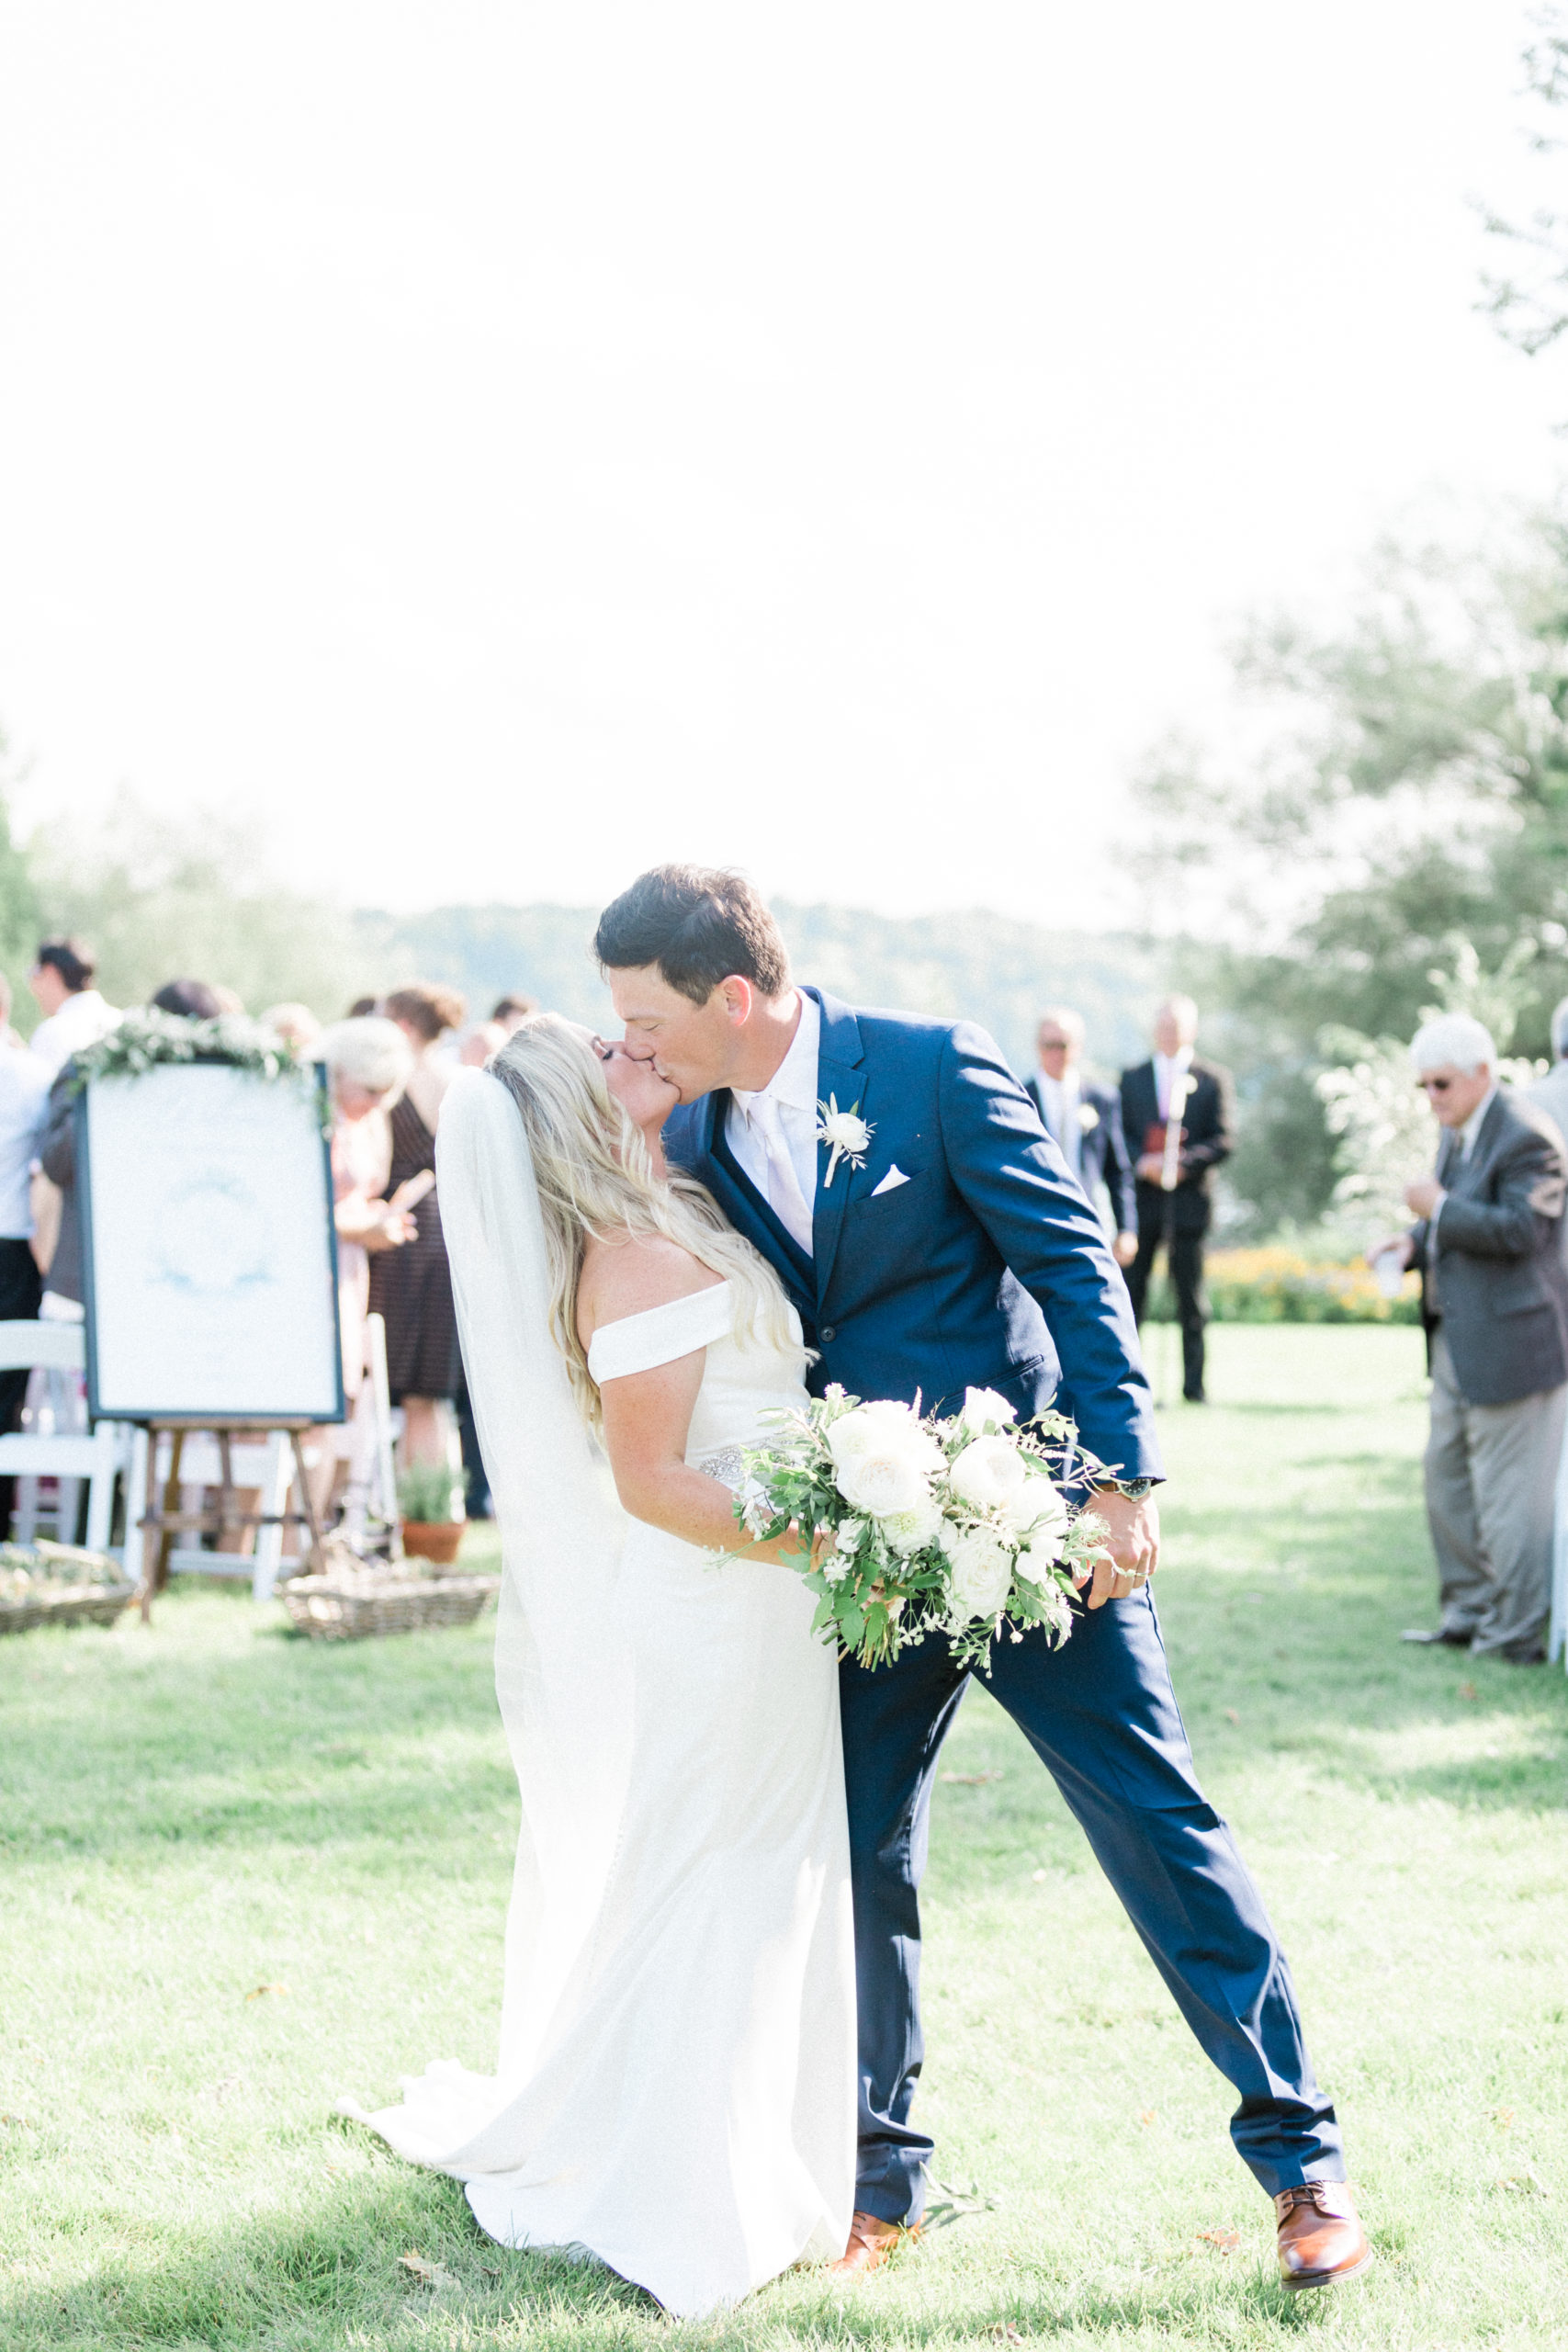 Michelle & Aaron's Classic and Romantic Summer Wedding